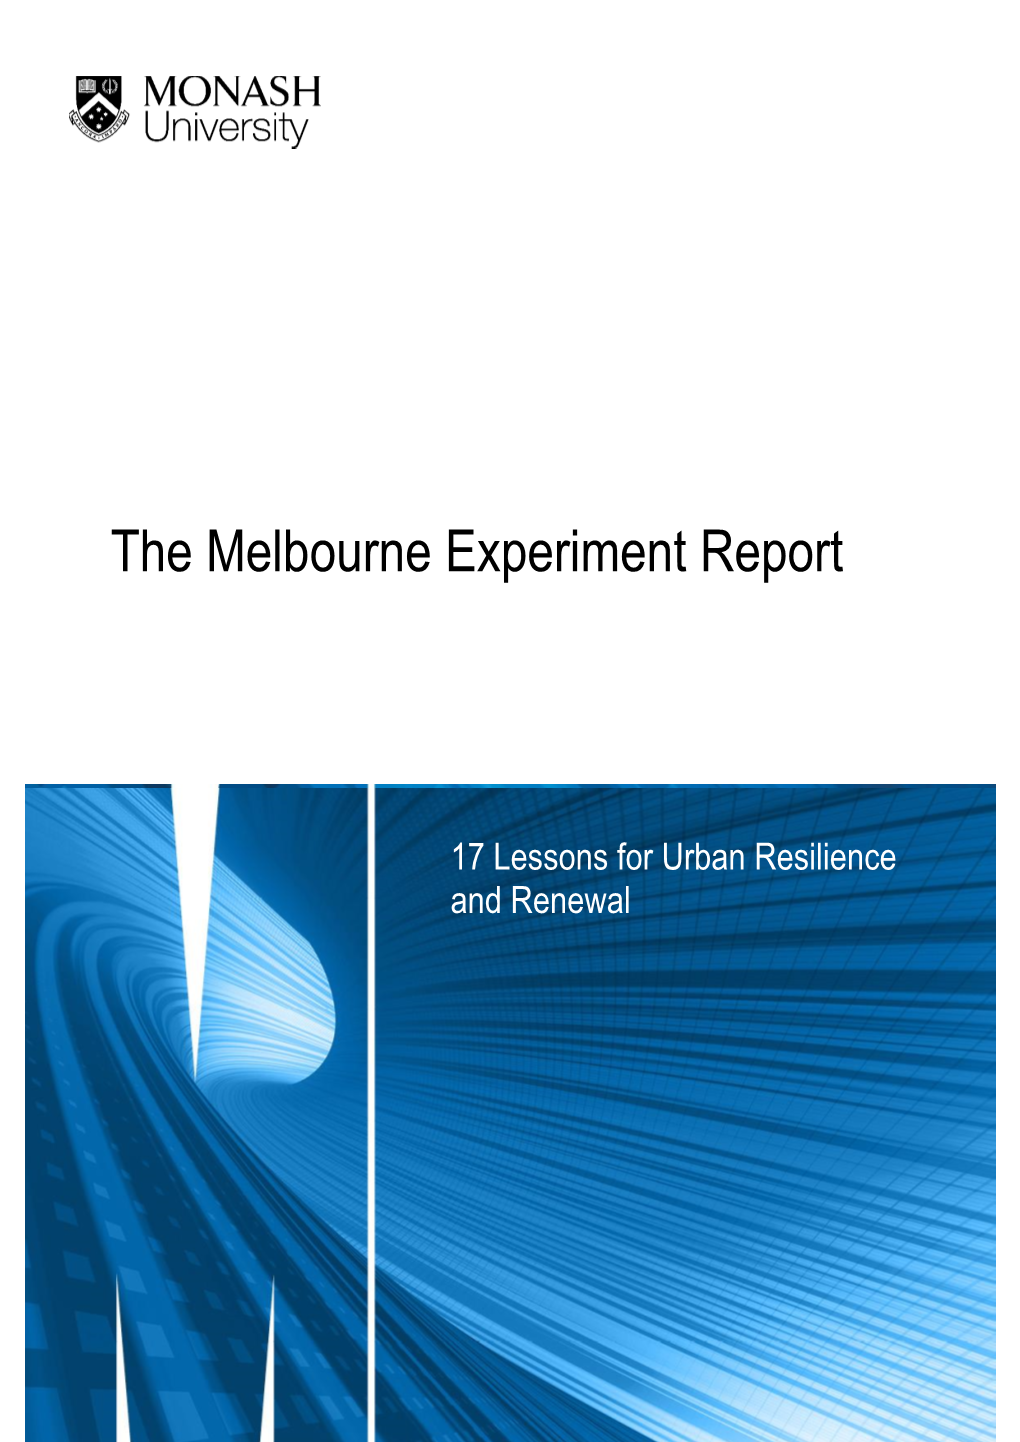 The Melbourne Experiment Report